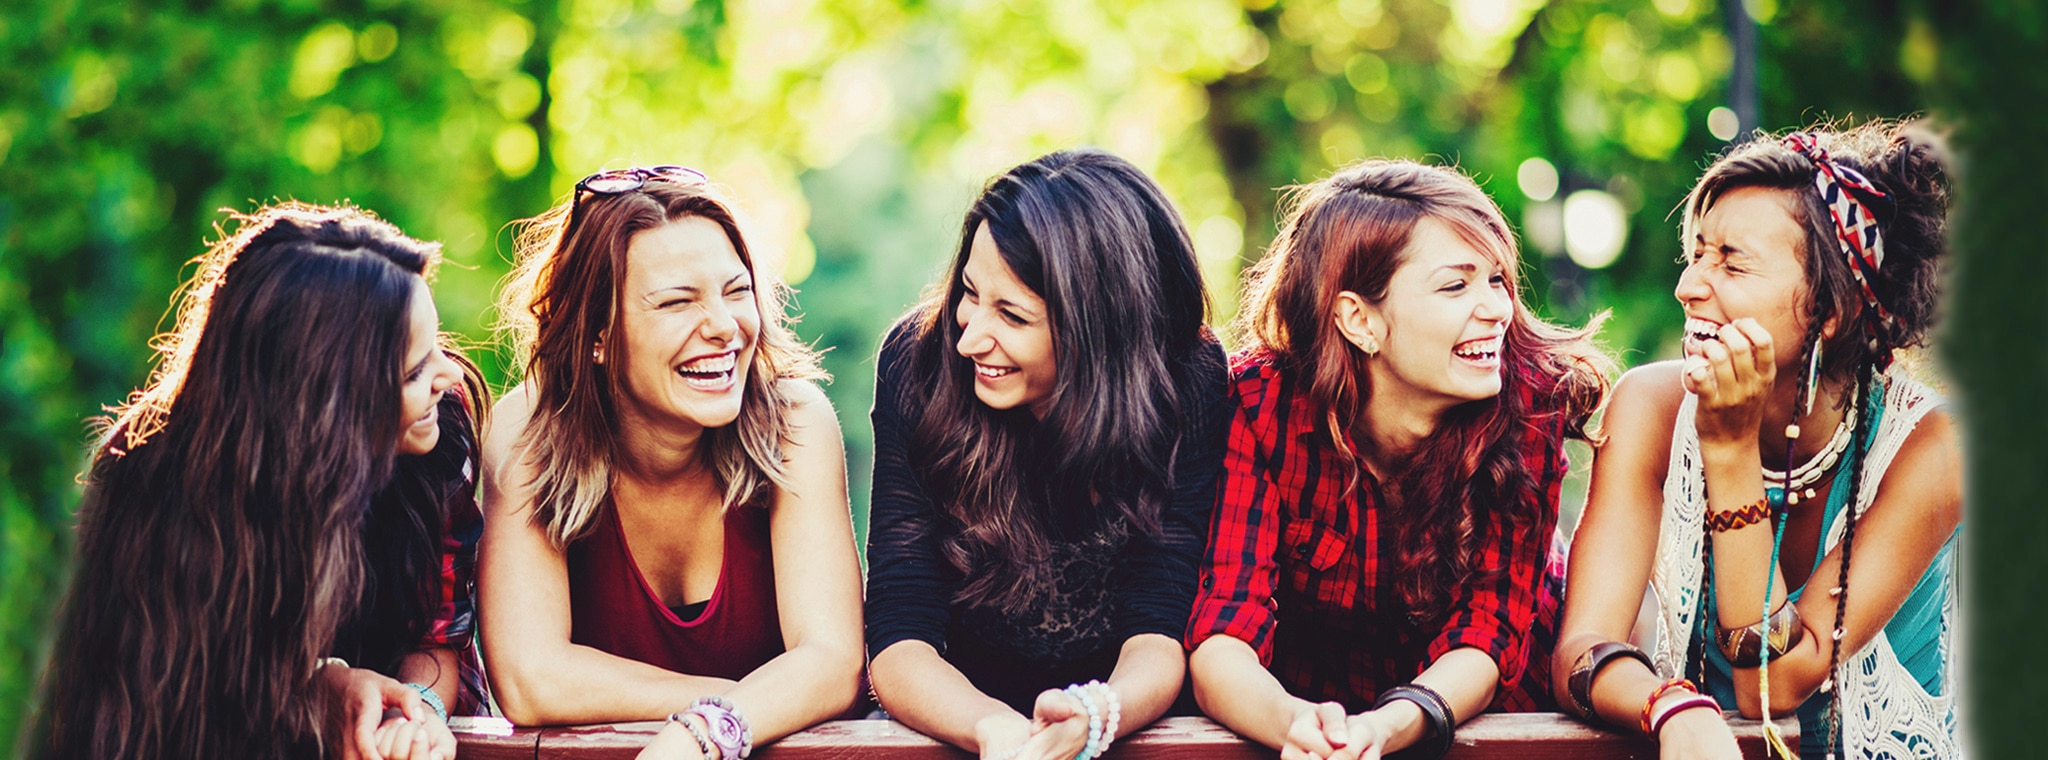 A group of girls with straight, curly hair laughing together on a bridge by a lake.